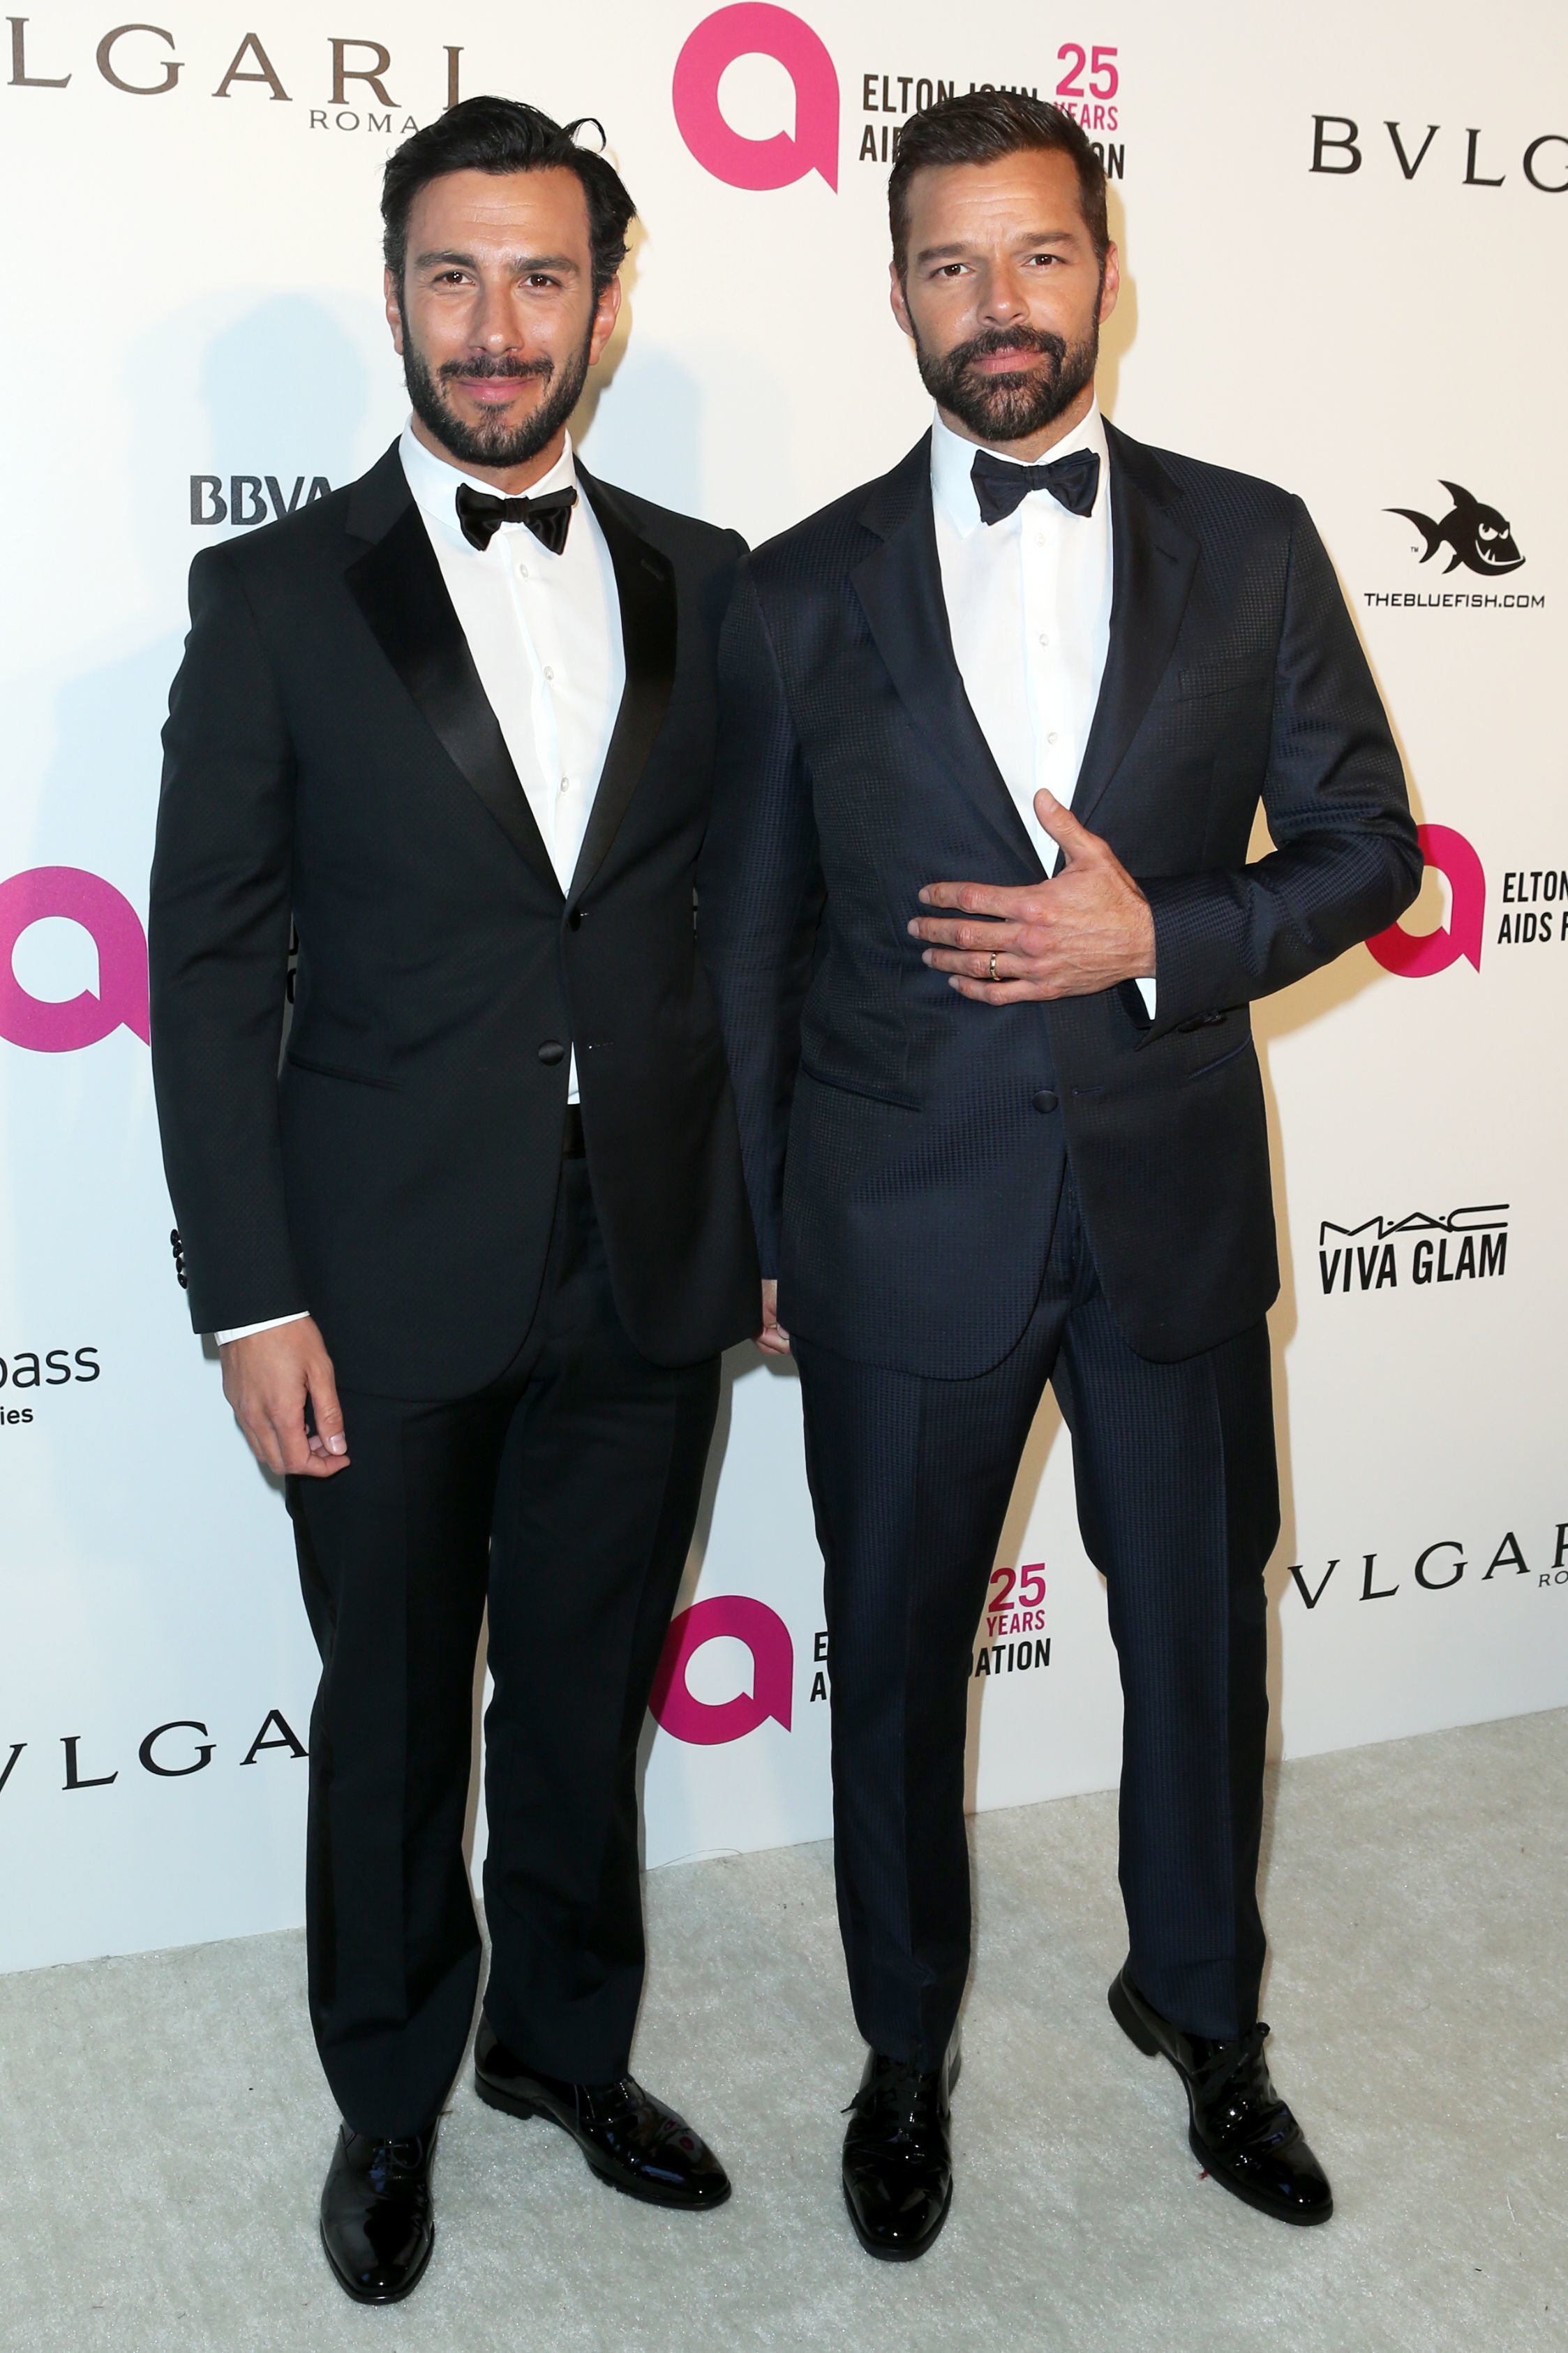 <p>Ricky Martin met Syrian-born Swedish artist Jwan Yosef <a href="https://www.wonderwall.com/celebrity/kylie-jenner-reportedly-has-four-nannies-plus-more-news-3013471.gallery?photoId=1022783">on Instagram</a>. "I'm scrolling and I see this beautiful piece of art and I'm like, 'Whoa, how cool! Who's this?' Then I start checking and all of a sudden I'm like, 'Ooh, ooh.' " And then I wrote to him," Ricky said on <a href="https://www.wonderwall.com/celebrity/profiles/overview/andy-cohen-1524.article">Andy Cohen</a>'s "Radio Andy" show in 2017. "Then we were talking for like six months without me hearing his voice. We talked about art -- nothing sexy... I swear, nothing sexy. It was all about art and life in general. He used to live in London, I went to London and I met him." When they were finally face to face, Ricky told Attitude magazine in 2018, "[I thought], 'I am marrying this guy.' And apparently he said exactly the same thing. Obviously he only told me this later on, you have to keep it to yourself at first! But I lost my breath when I saw him. Six months' build-up and it was very romantic." They got engaged in 2016 and in early 2018, Ricky revealed they'd quietly <a href="https://www.wonderwall.com/news/ricky-martin-reveals-hes-married-jwan-yosef-3011870.article">tied the knot</a>.</p>